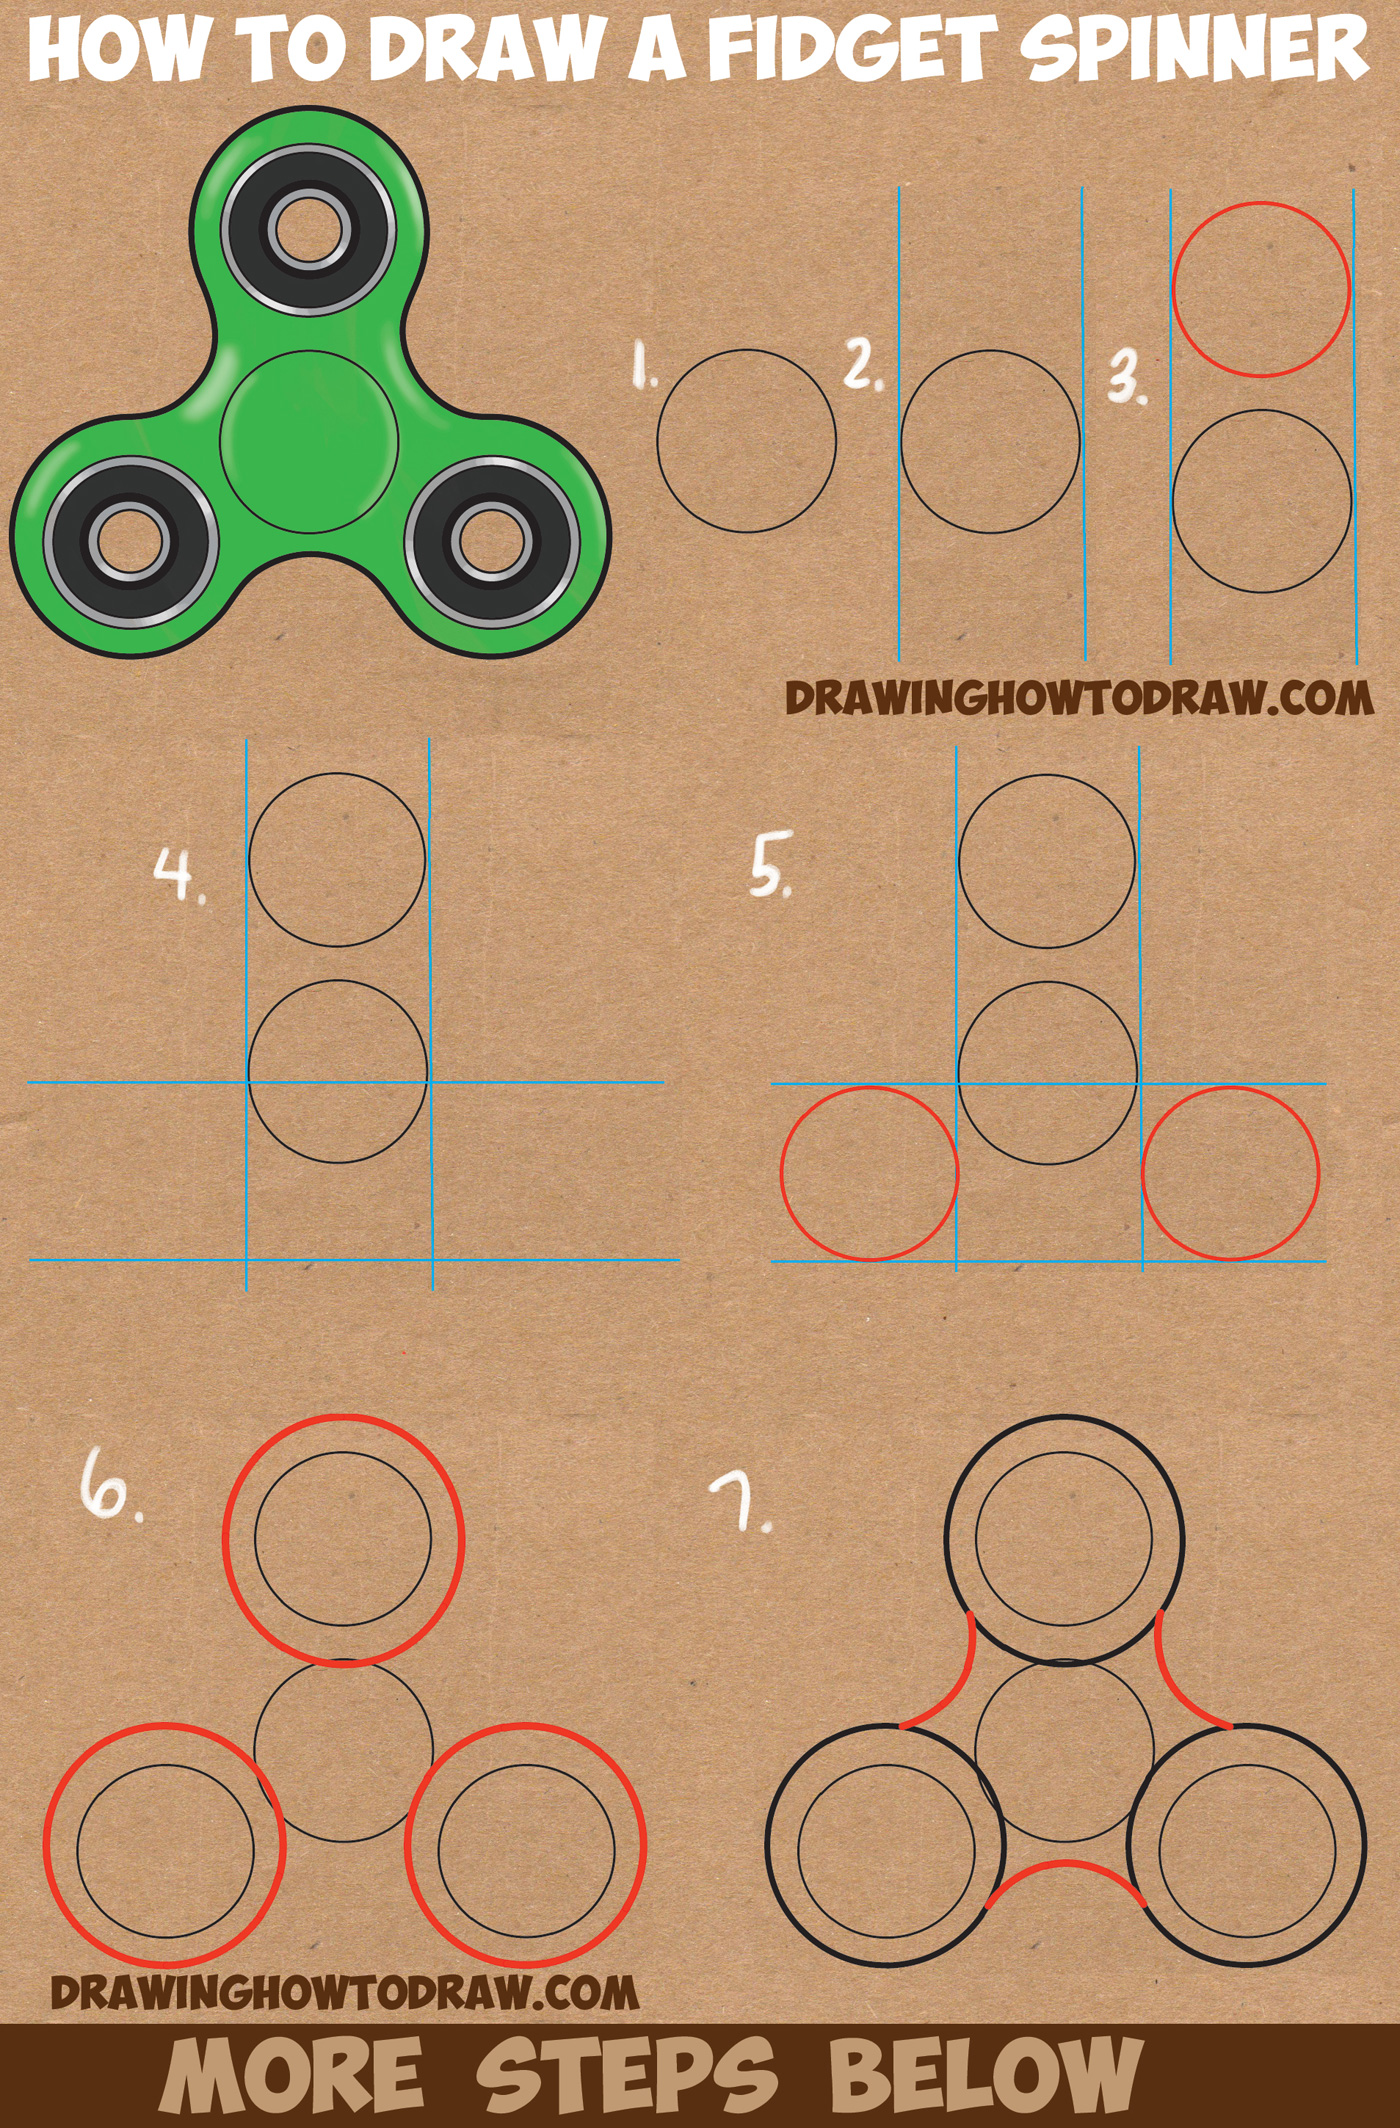 how to draw a fidget spinner step by step